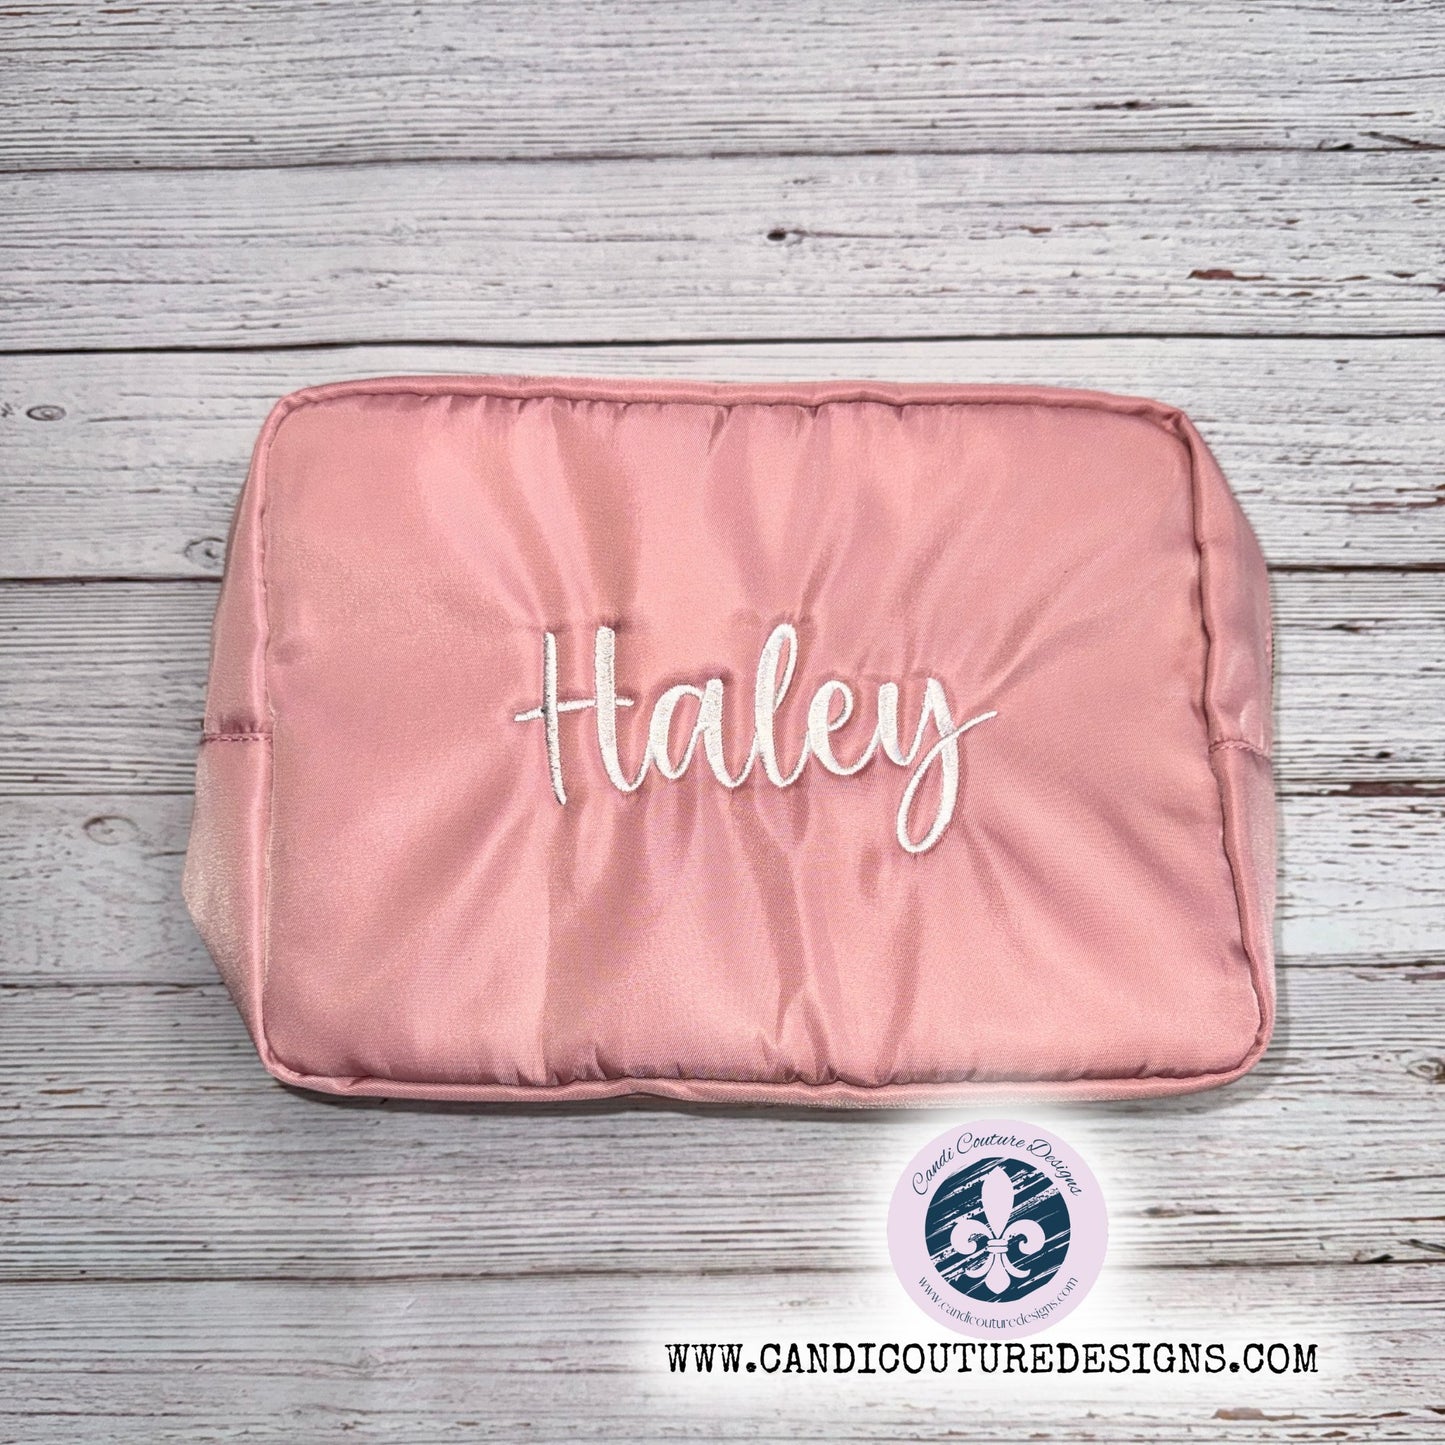 Large Monogrammed Makeup Bag, Personalized Cosmetic Organizer, Custom Travel Toiletry Case, Spacious Vanity Pouch, Bridesmaid Gift, High - Quality Embroidered Name Bag, Stylish Beauty Accessories Holder - Candicouturedesigns